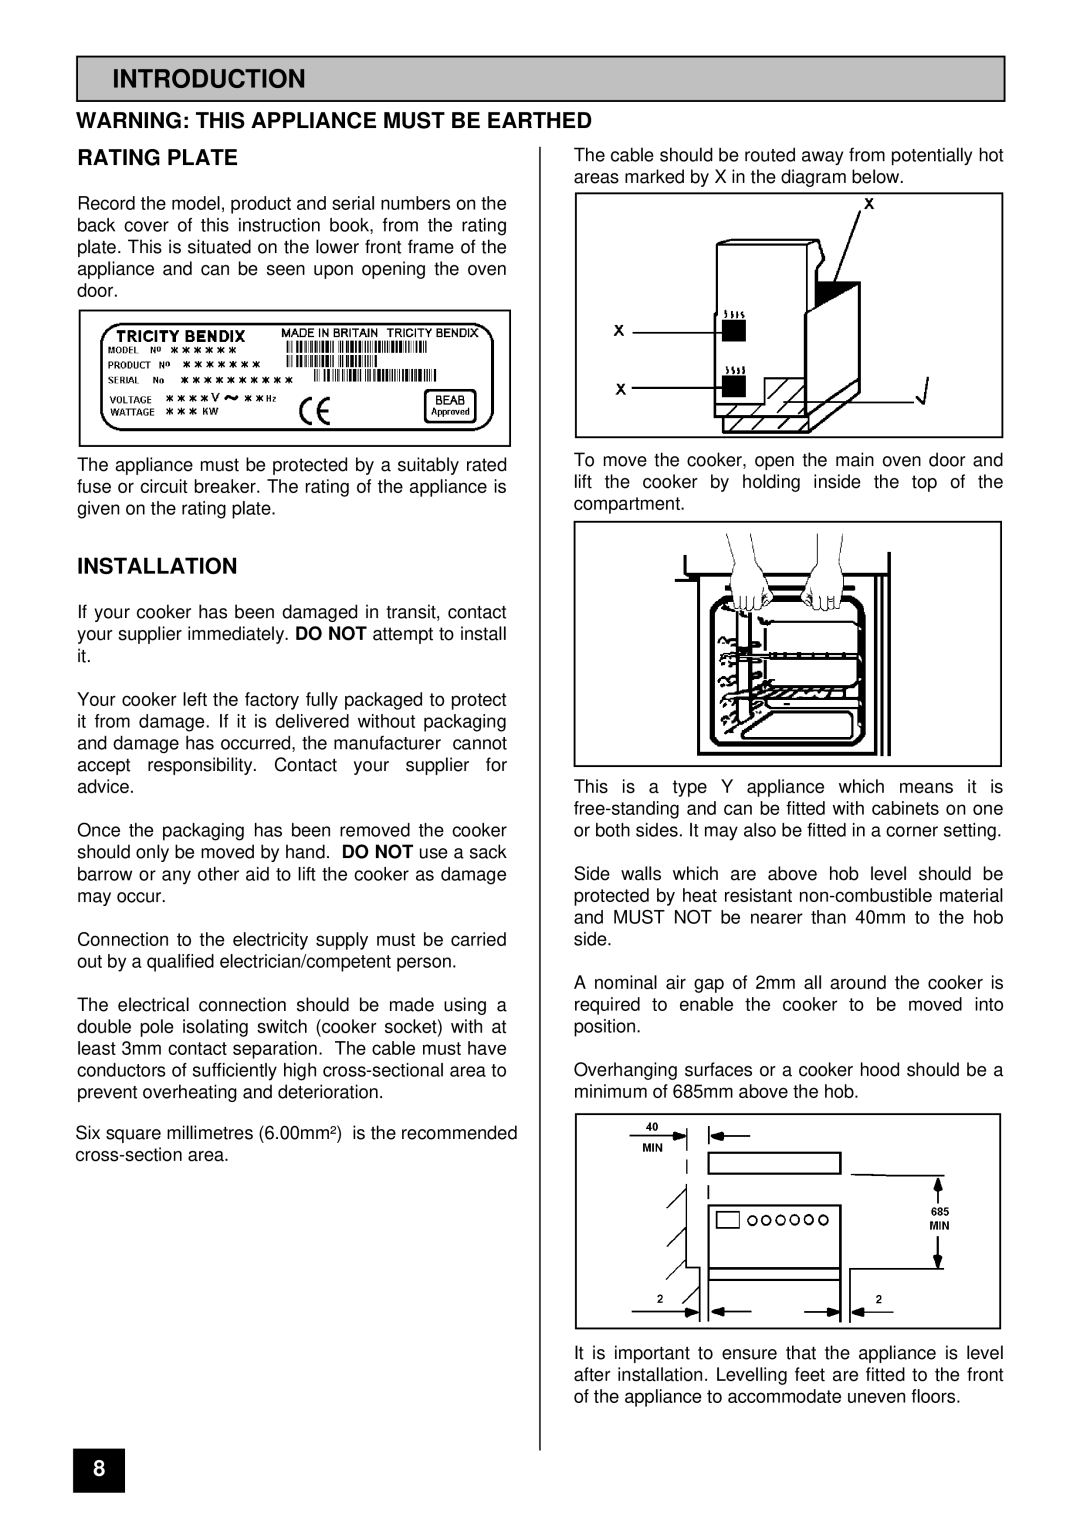 Tricity Bendix SB 461 installation instructions Introduction, Rating Plate, Installation 